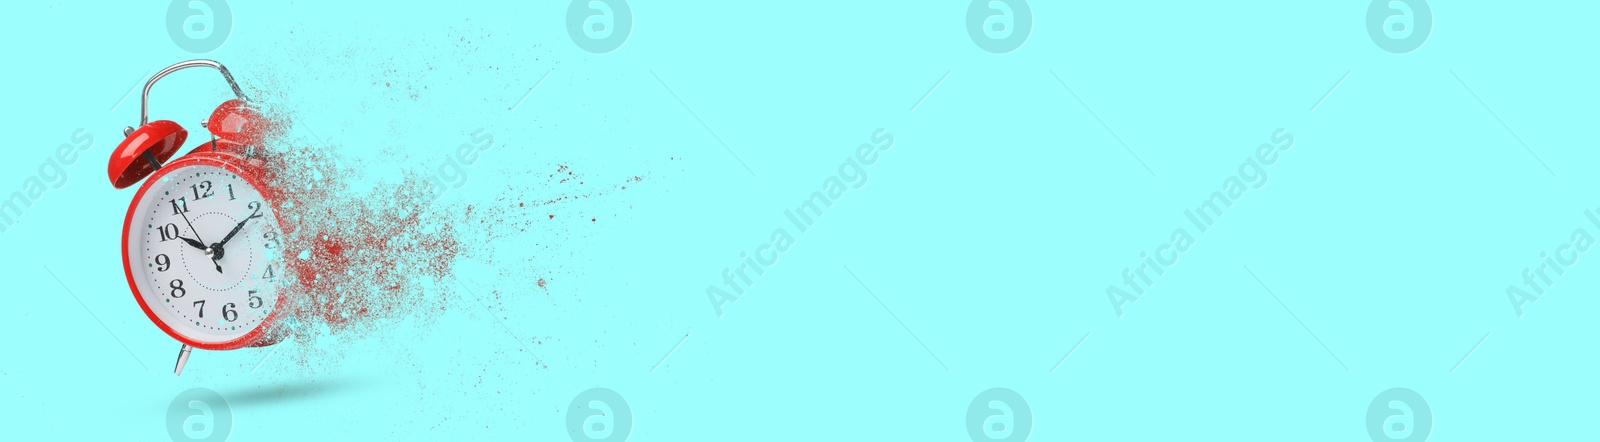 Image of Red alarm clock dissolving on light blue background, banner design with space for text. Flow of time